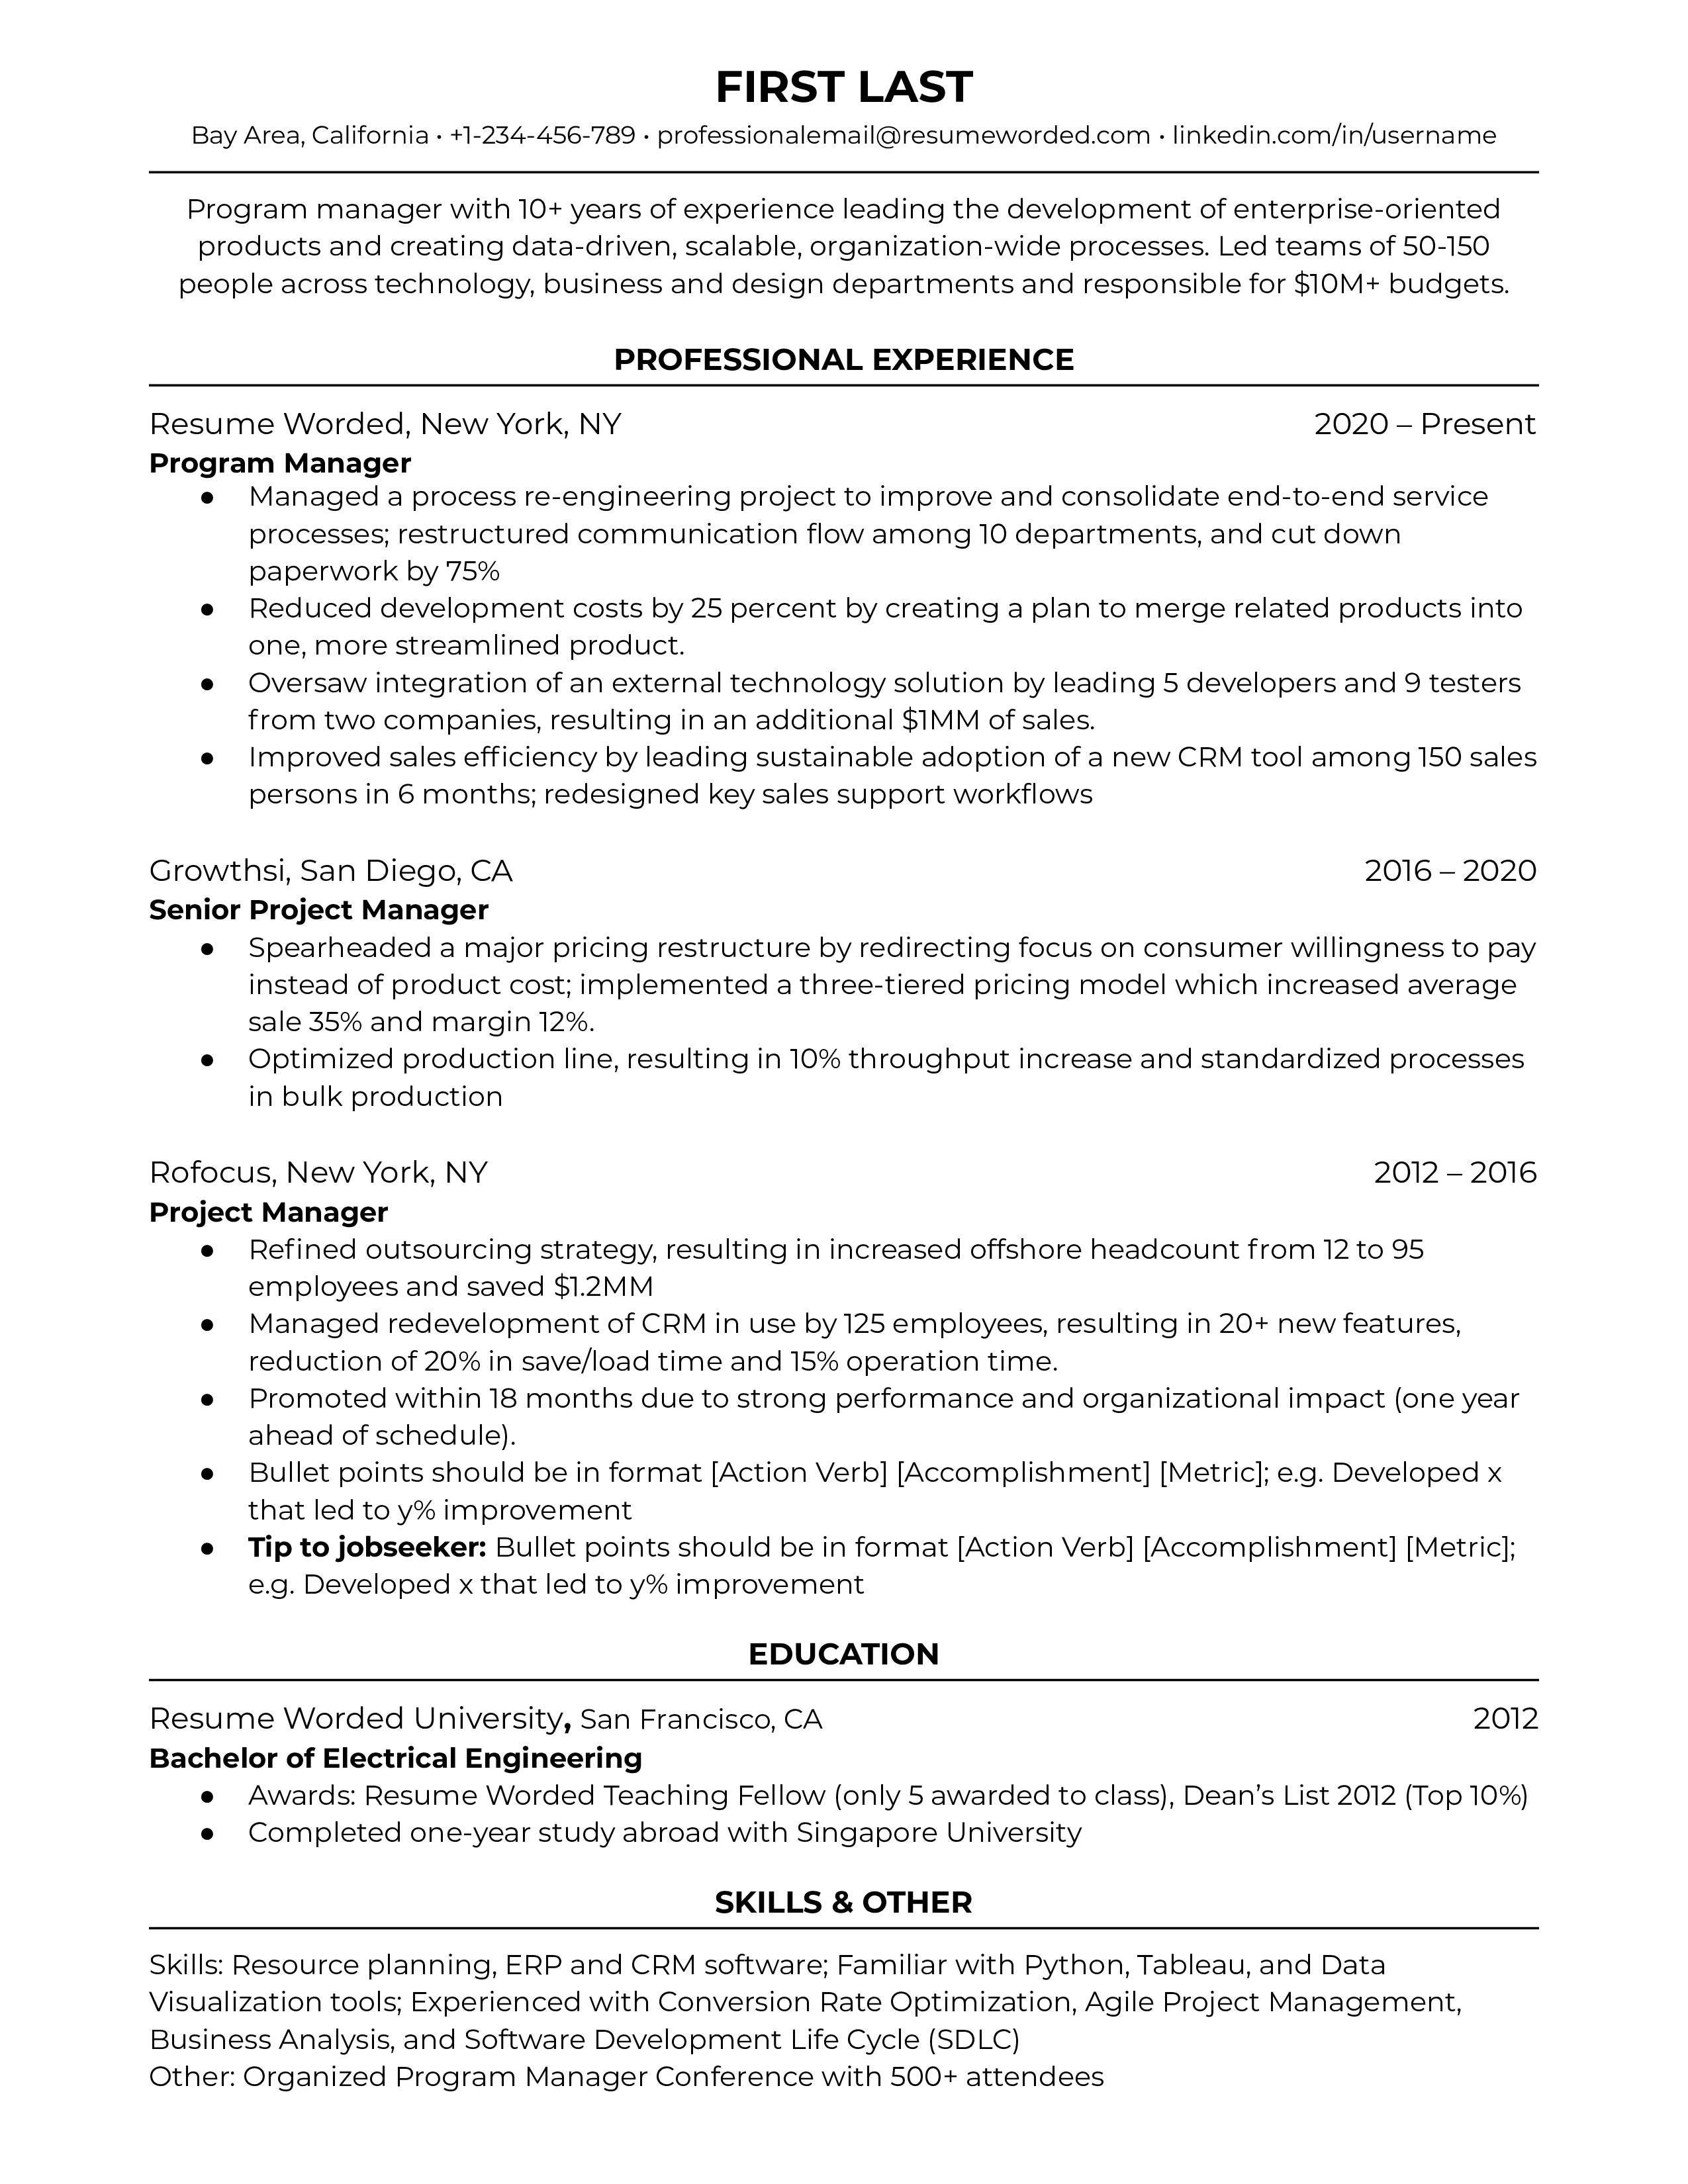 A program manager resume template with bullet points for experience, numeric examples, and relevant information for the role. 